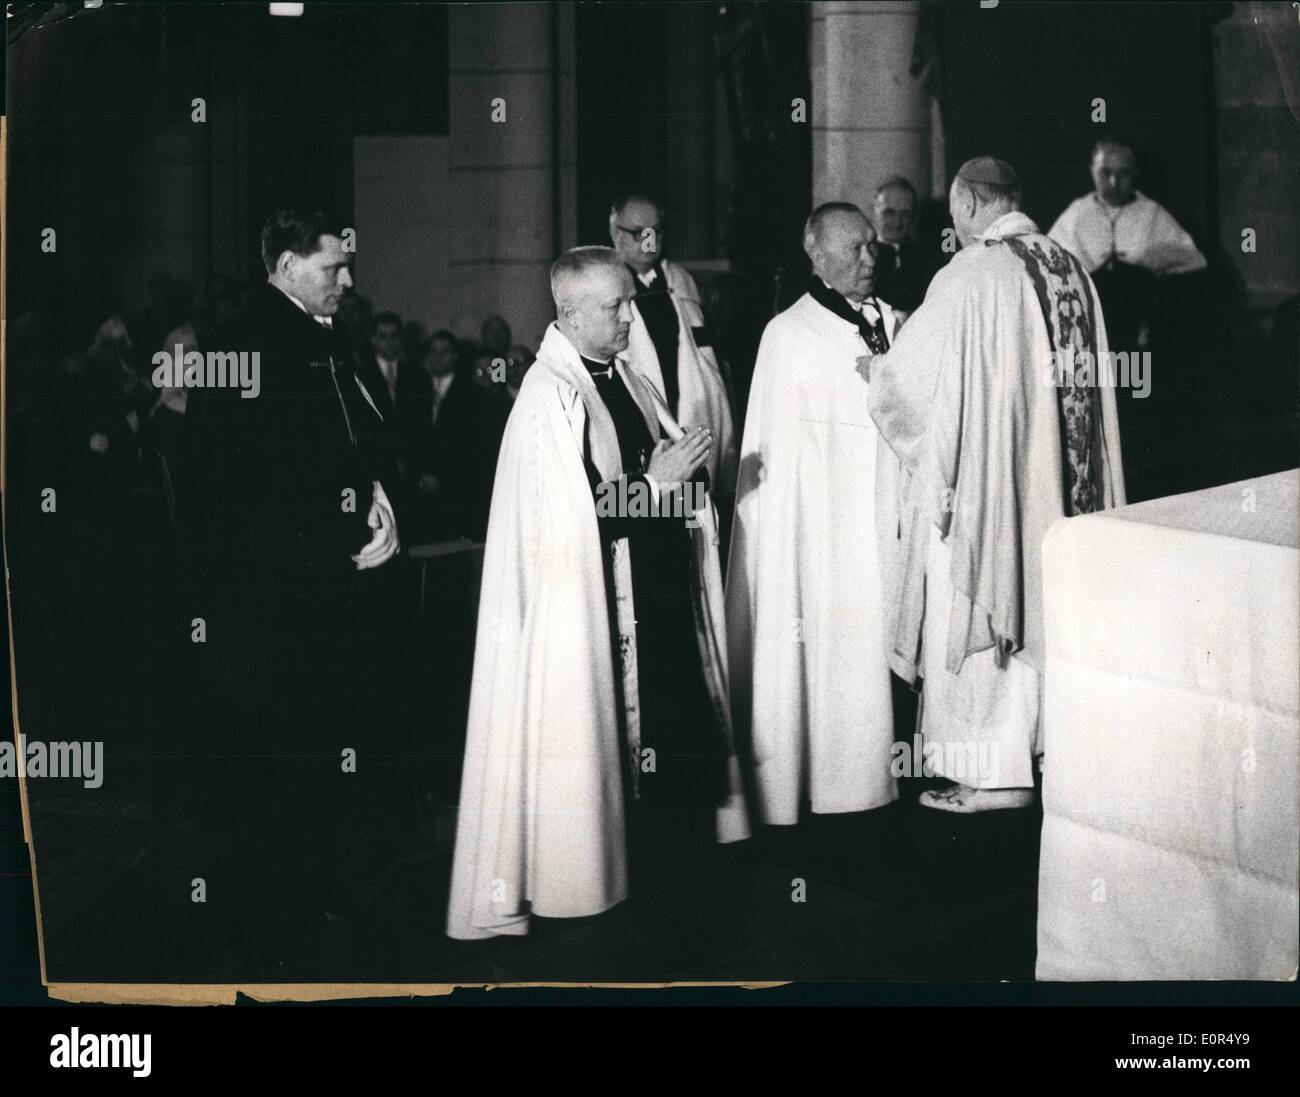 Mar. 03, 1958 - Federal Chancellor Dr. Adenauer Knight of Honour of The German Order. The Grand master of the German Order, Abbot Marian Tumler was admitting the Federal Chancellor Dr. Konrad Adenauer as Knight of Honour of the German Order. The Austrian Federal Chancellor Raab, staging as assistant of honour for his German colleague, also was present at the solemn inauguration in the Andreas-Church of Cologne. Our picture shows: The Grand Master of the German Order, Abbot P. Marian Tumler, bestowing his blessing to the new Knight of Honour Dr. Konrad Adenauer. Stock Photo